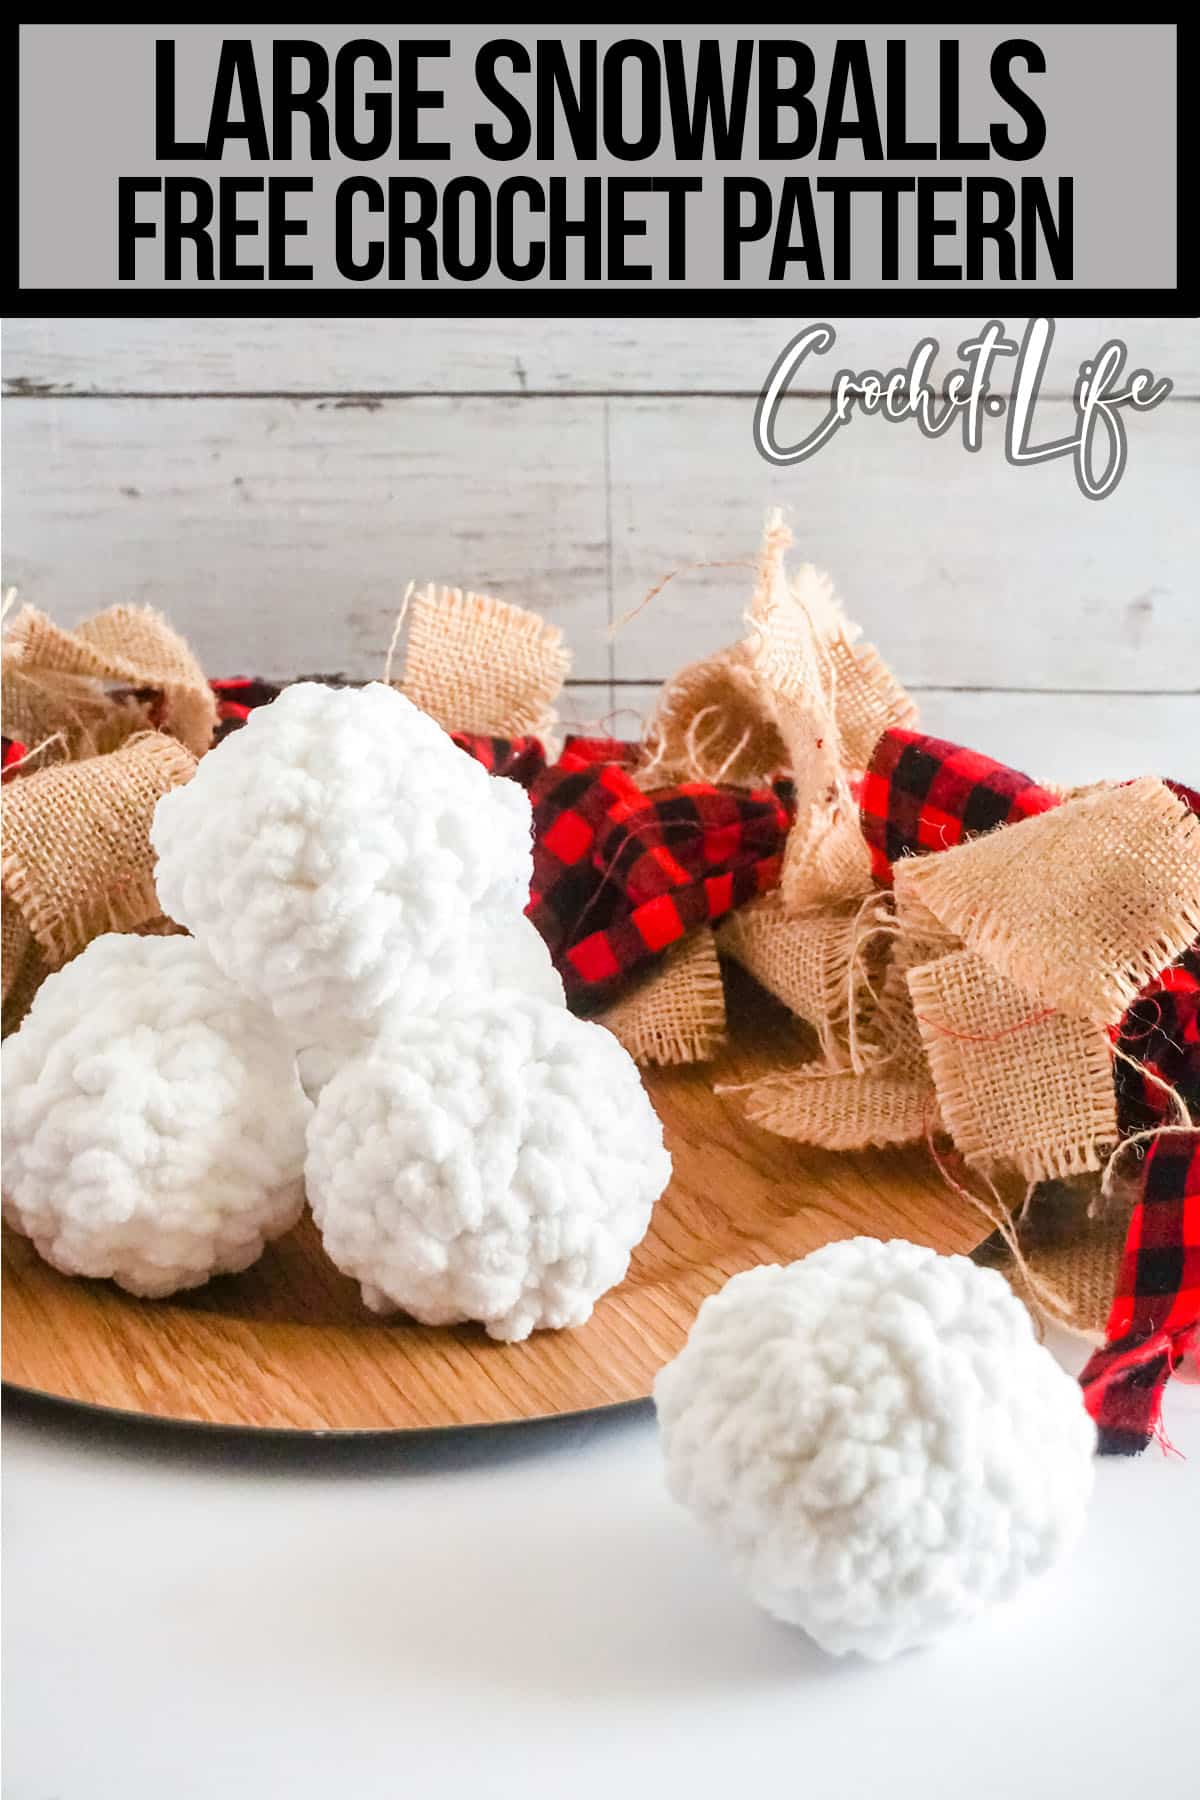 crochet snow ball pattern with text which reads large snowball free crochet pattern